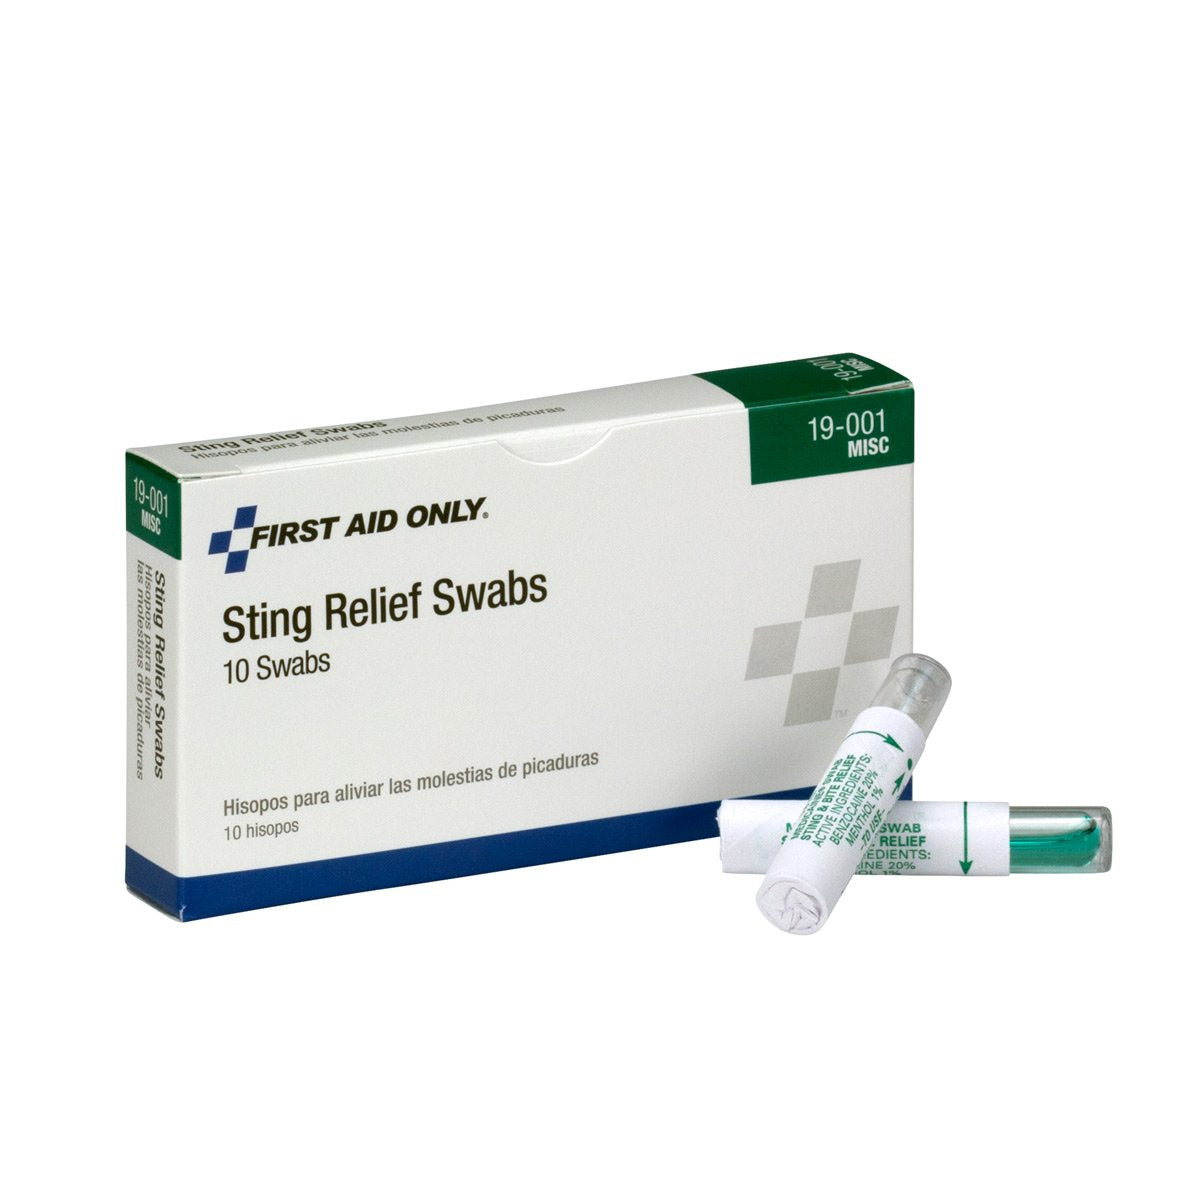 First Aid Only 19-001 Sting Relief Swabs, 10 Count